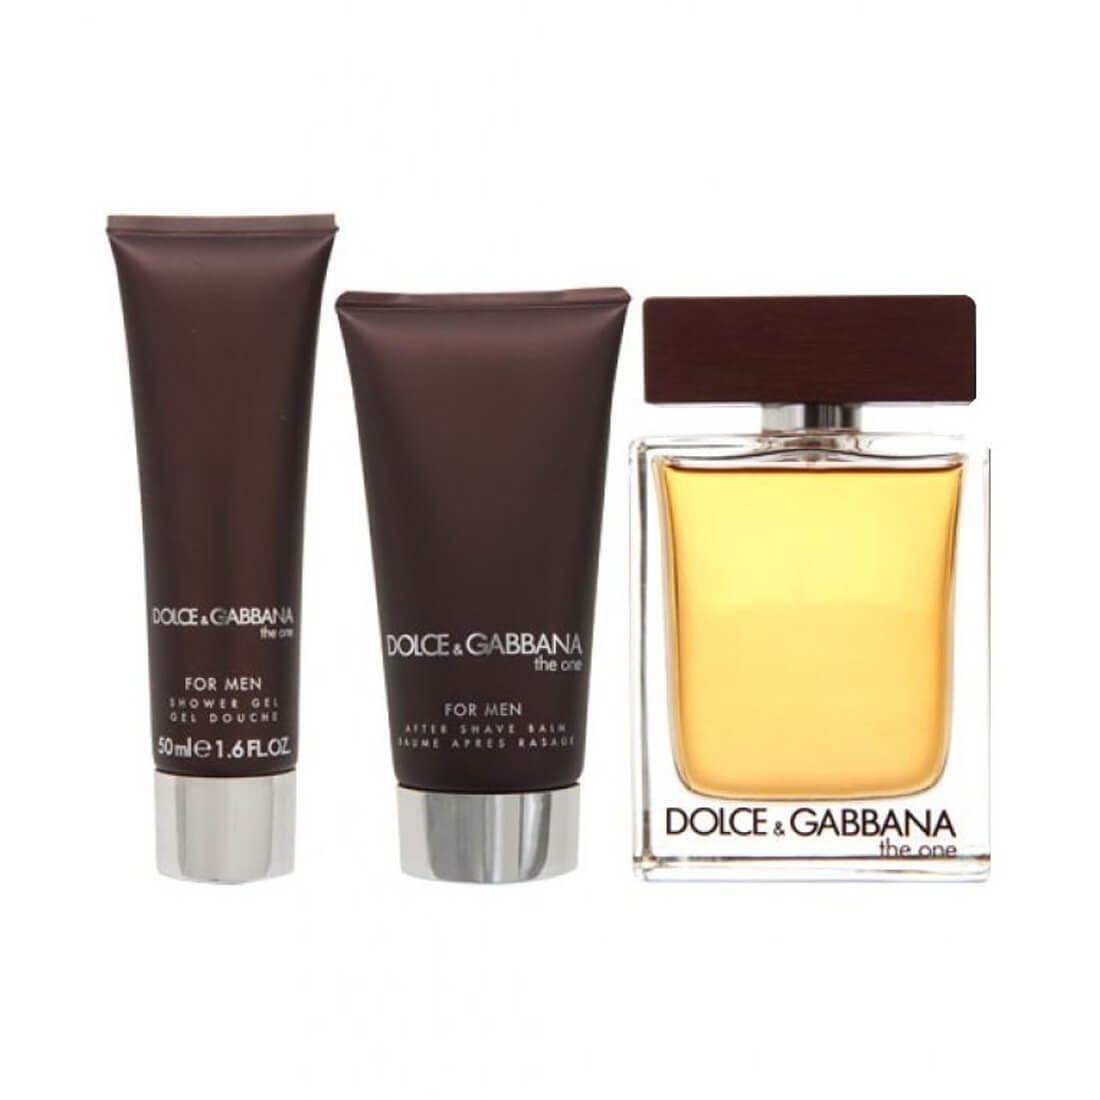 dolce and gabbana the one gift set